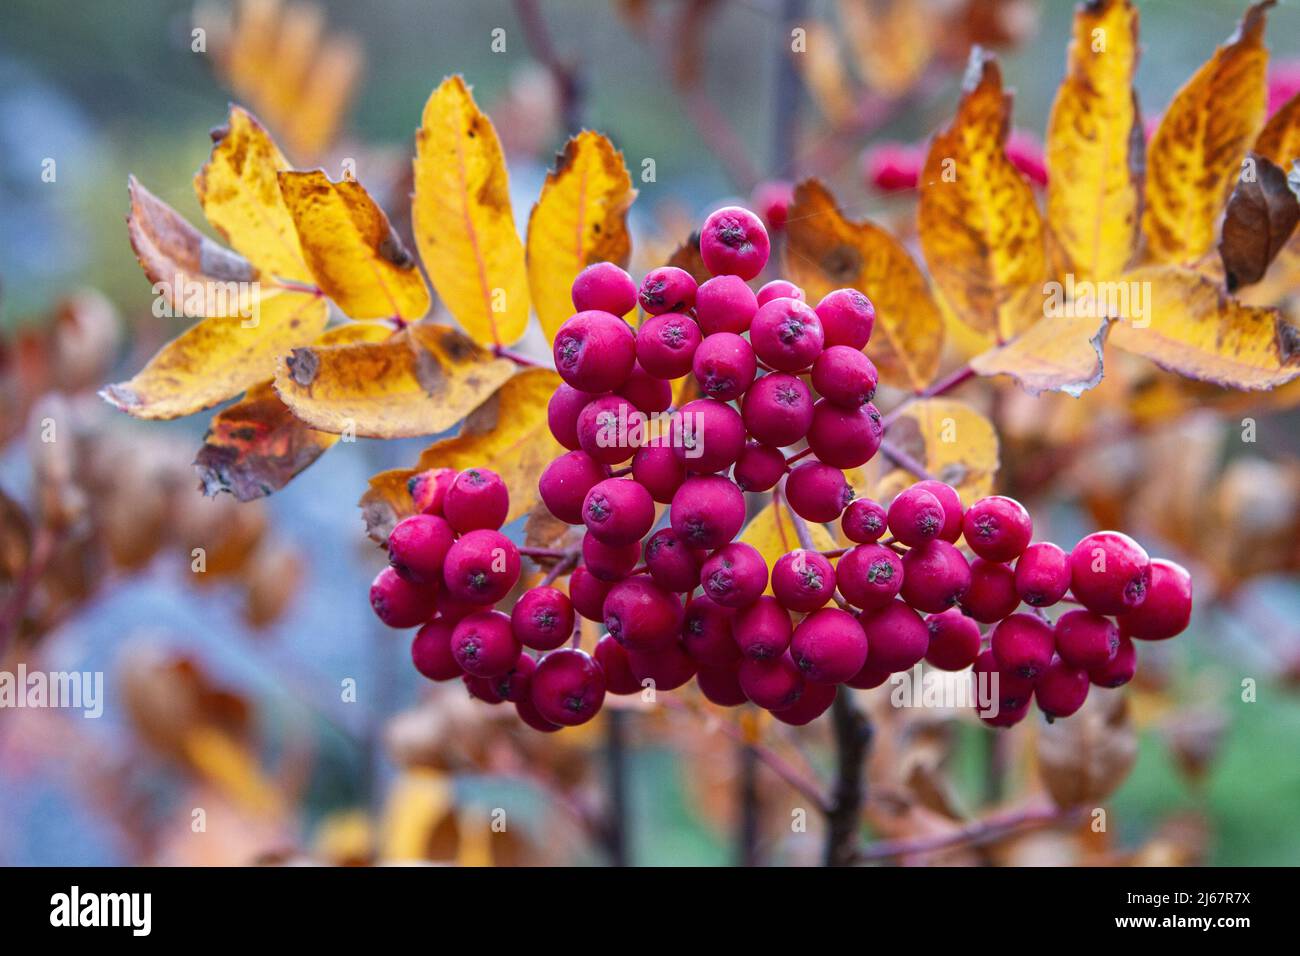 Closeup photograph of bright red Western Mountain Ash (Sorbus sitchensis) berries in autumn with yellow leaves in the background. Stock Photo